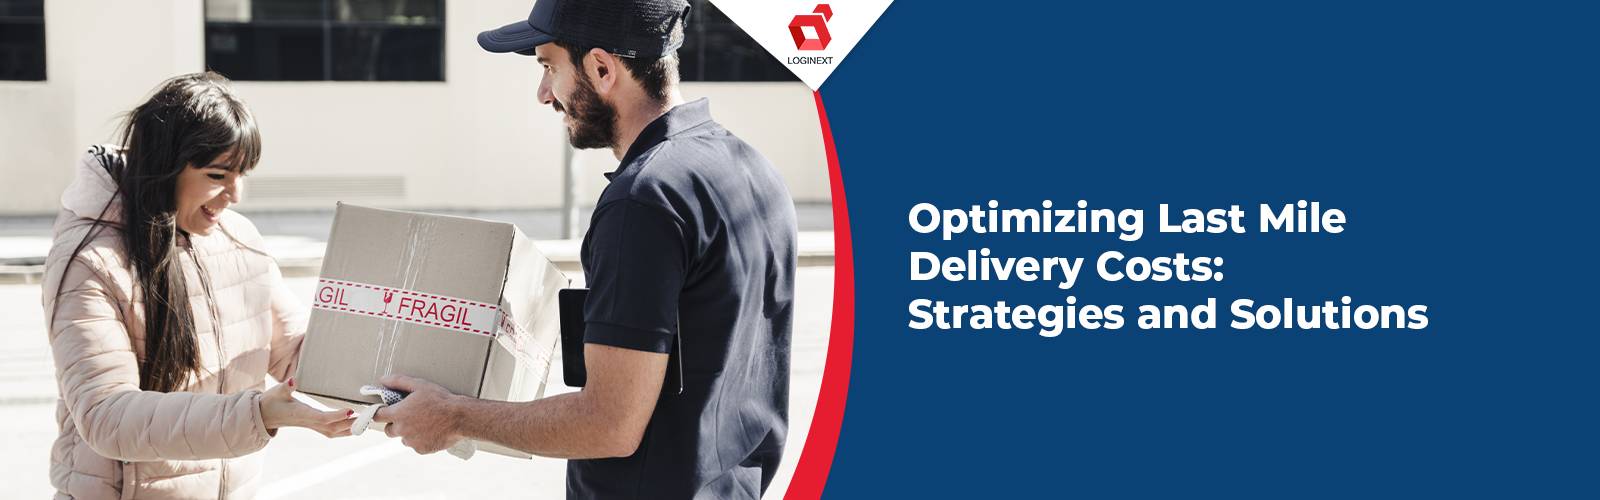 Strategies and Solutions to Optimize Last Mile Delivery Costs